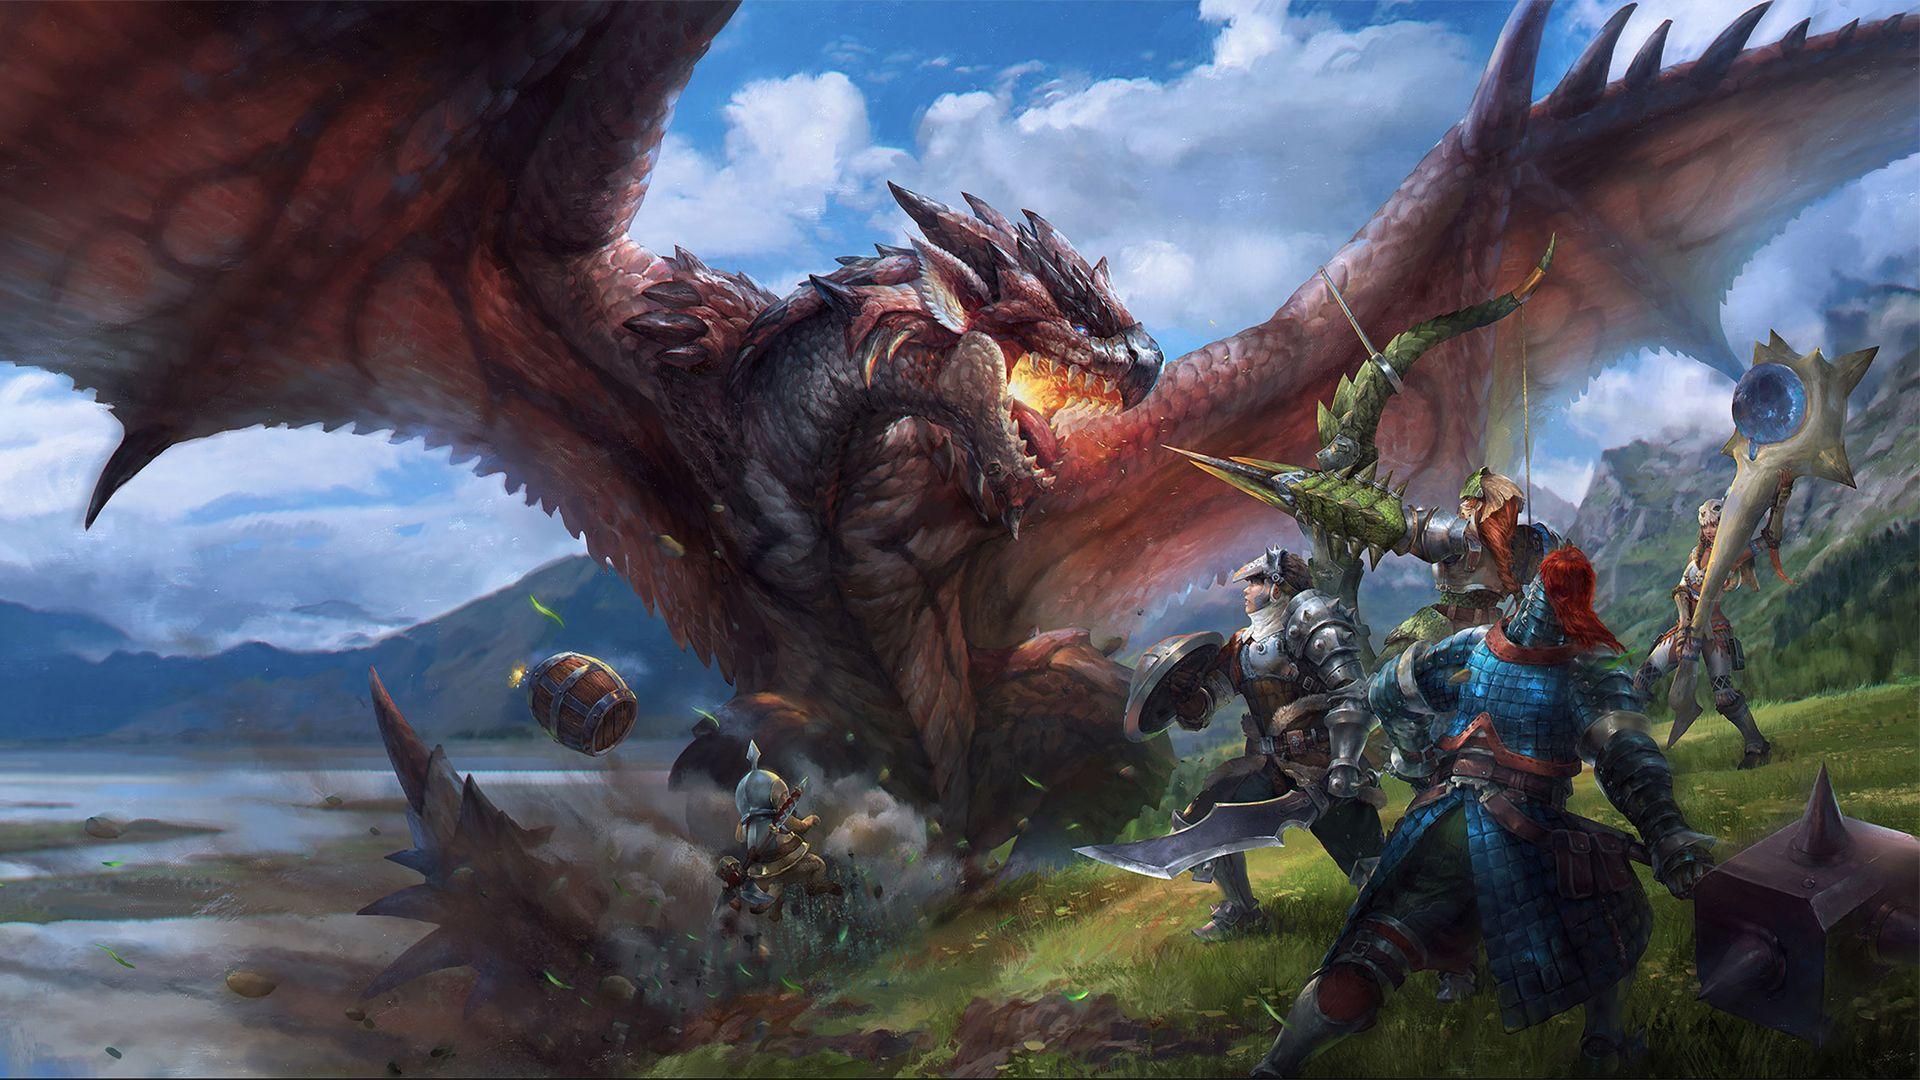 Group of hunters facing off against a dragon. Wallpaper from Monster